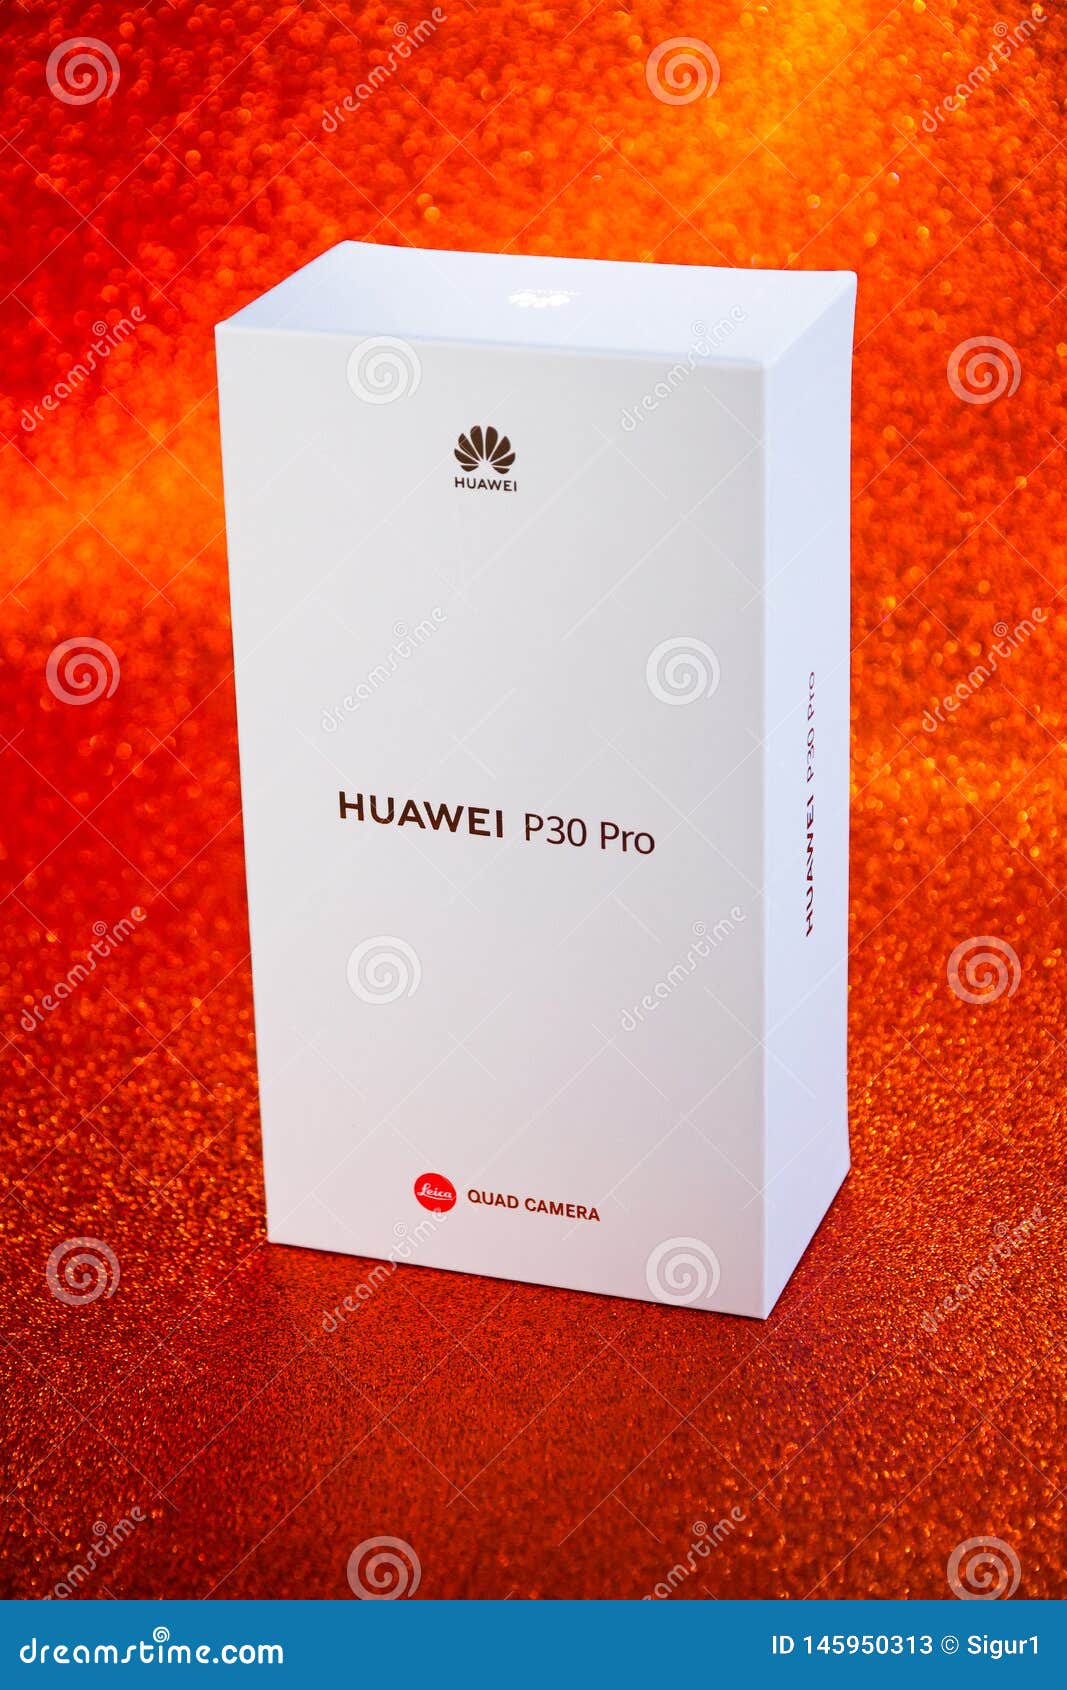 Huawei P30 Pro Smartphone Brand New in Its Original Box Editorial Stock  Photo - Image of design, golden: 145950313